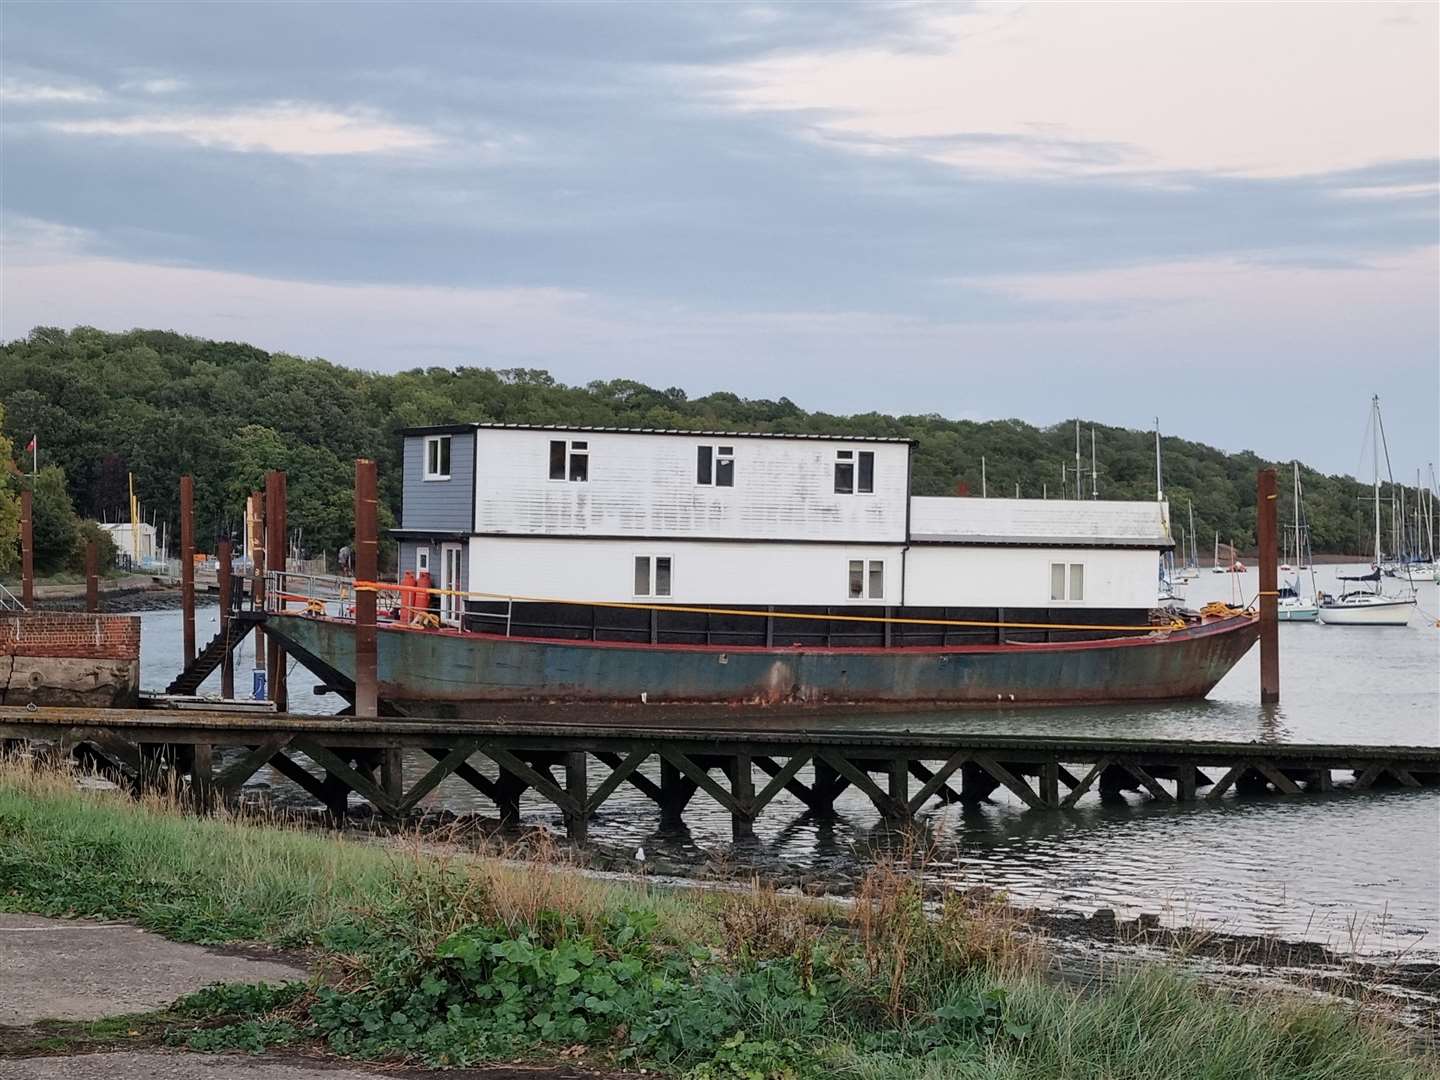 Residents say houseboat is an eyesore and Medway Council is investigating whether there has been a breach of planning regulations